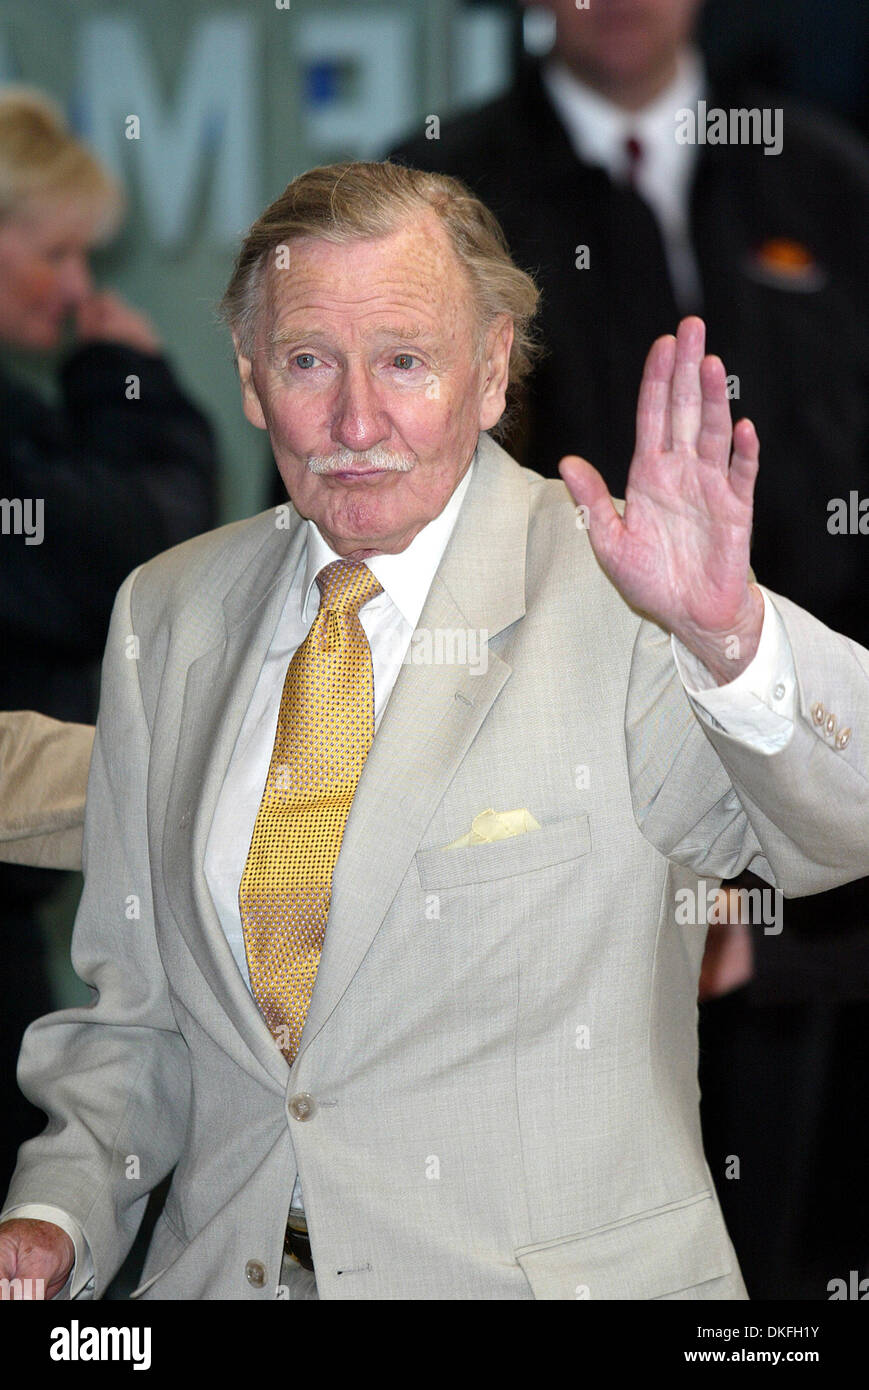 LESLIE PHILLIPS.ACTOR .ODEON LEICESTER SQUARE, LONDON.03/11/2002.DI3963.CREDIT: ALLSTAR/ Stock Photo